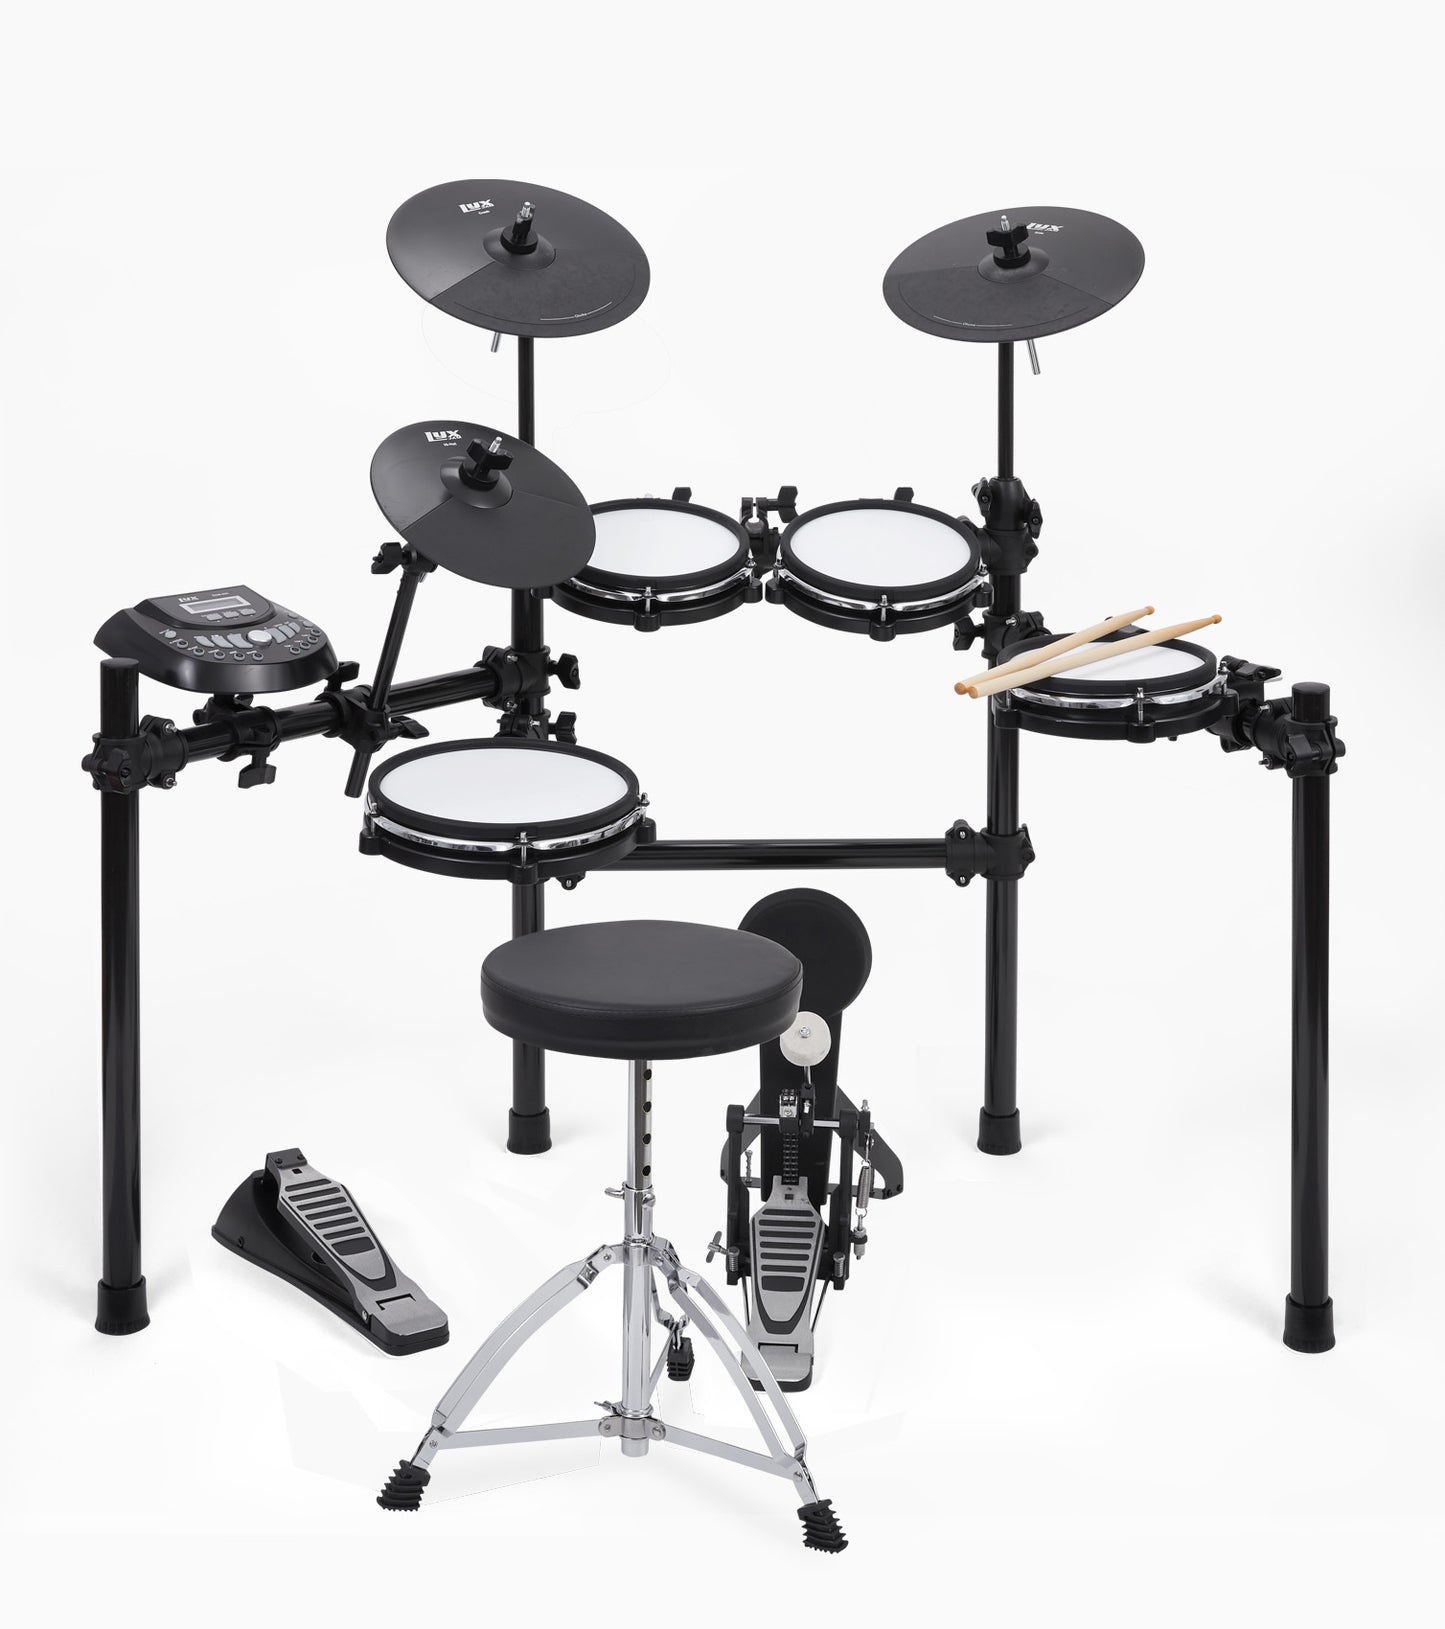 8 piece drum set by LyxPro